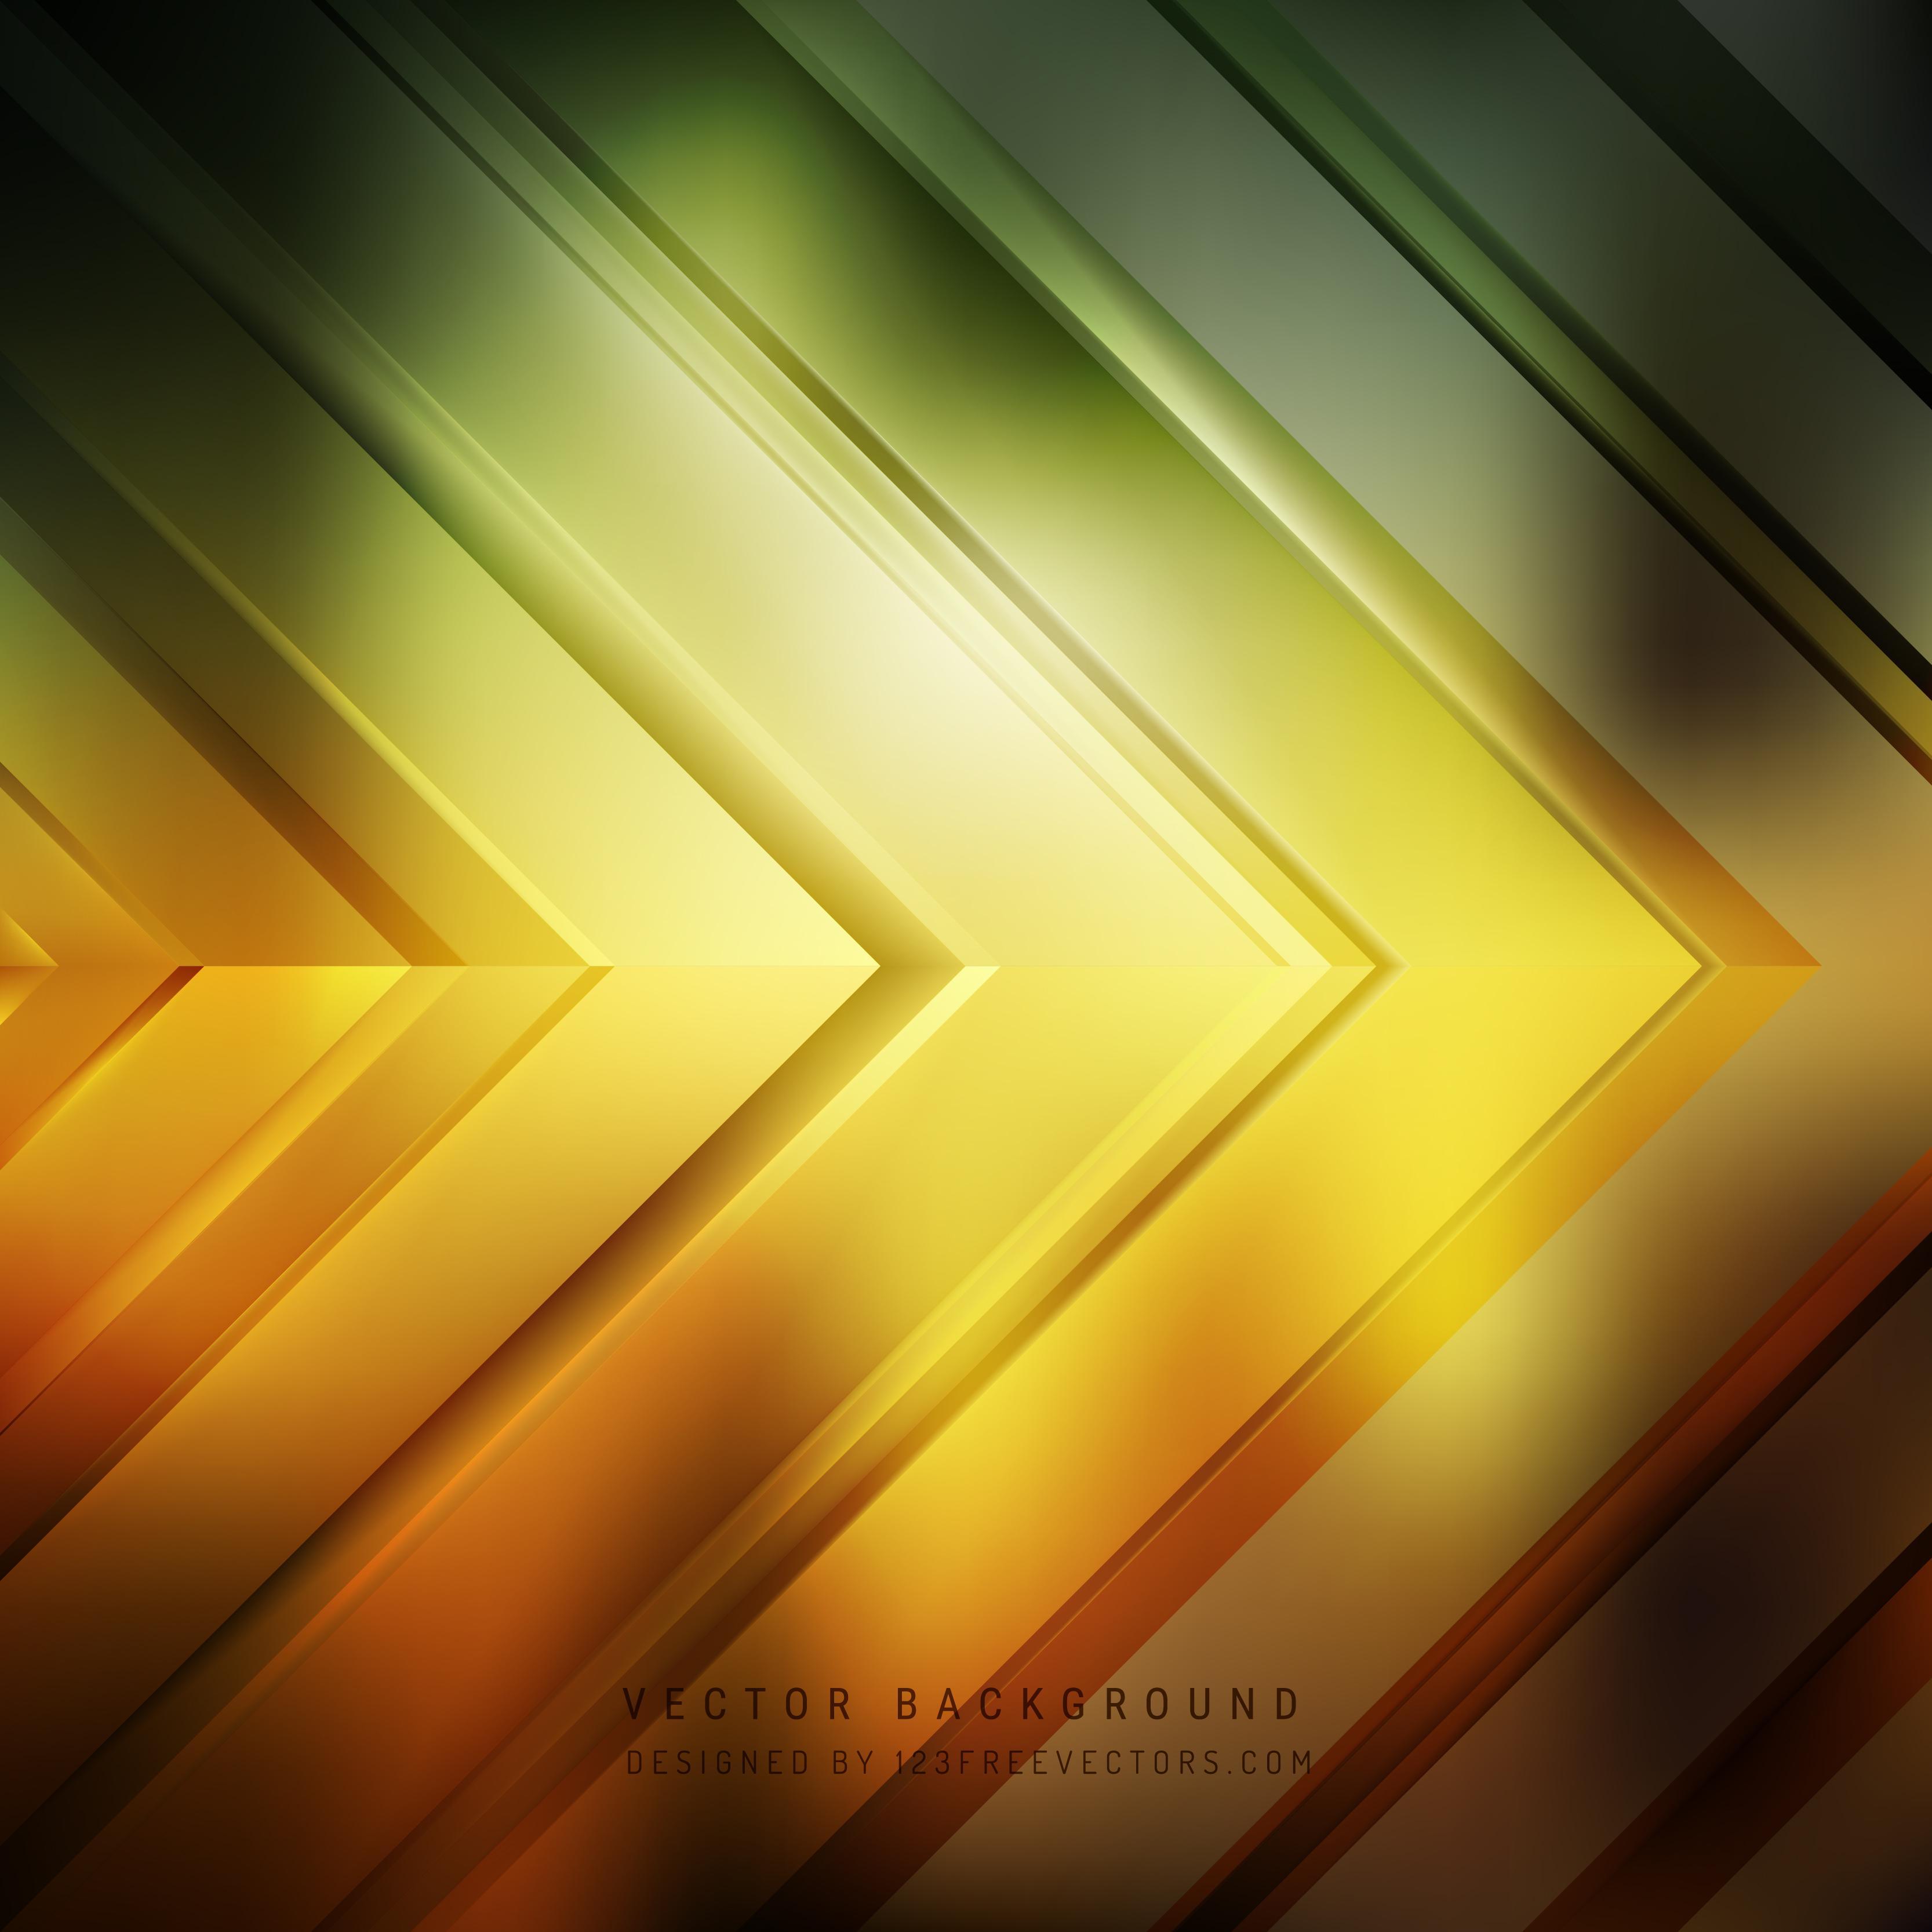 Free Abstract Black Green and Yellow Arrow Background Illustrator